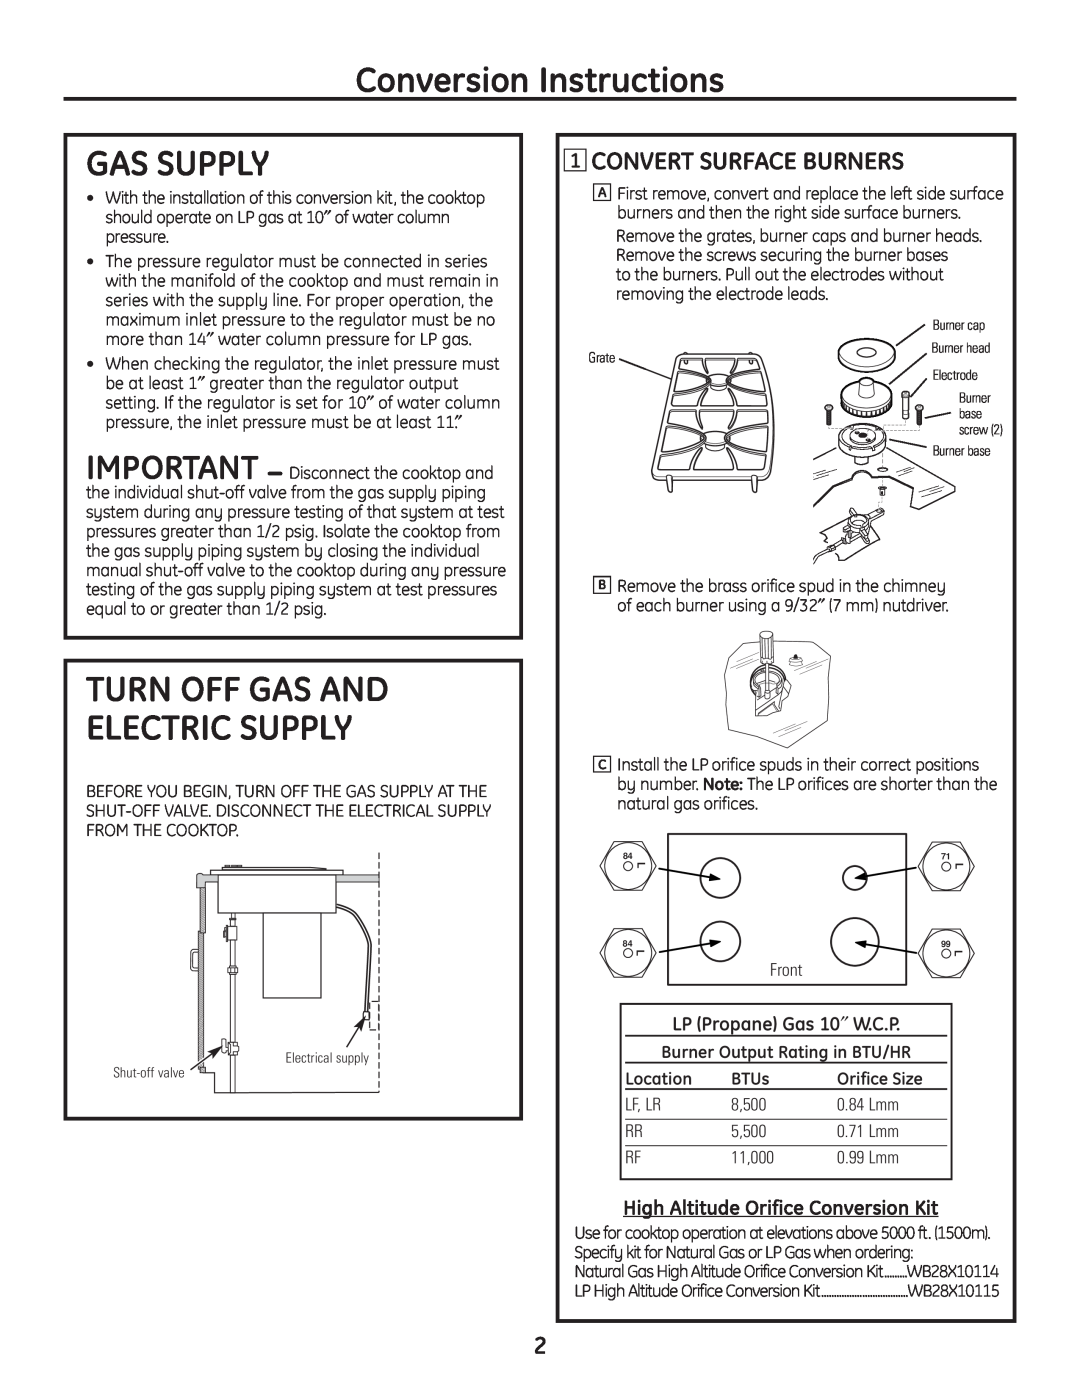 GE PGP989 Conversion Instructions, Gas Supply, Turn Off Gas And Electric Supply, Convert Surface Burners, Location, BTUs 